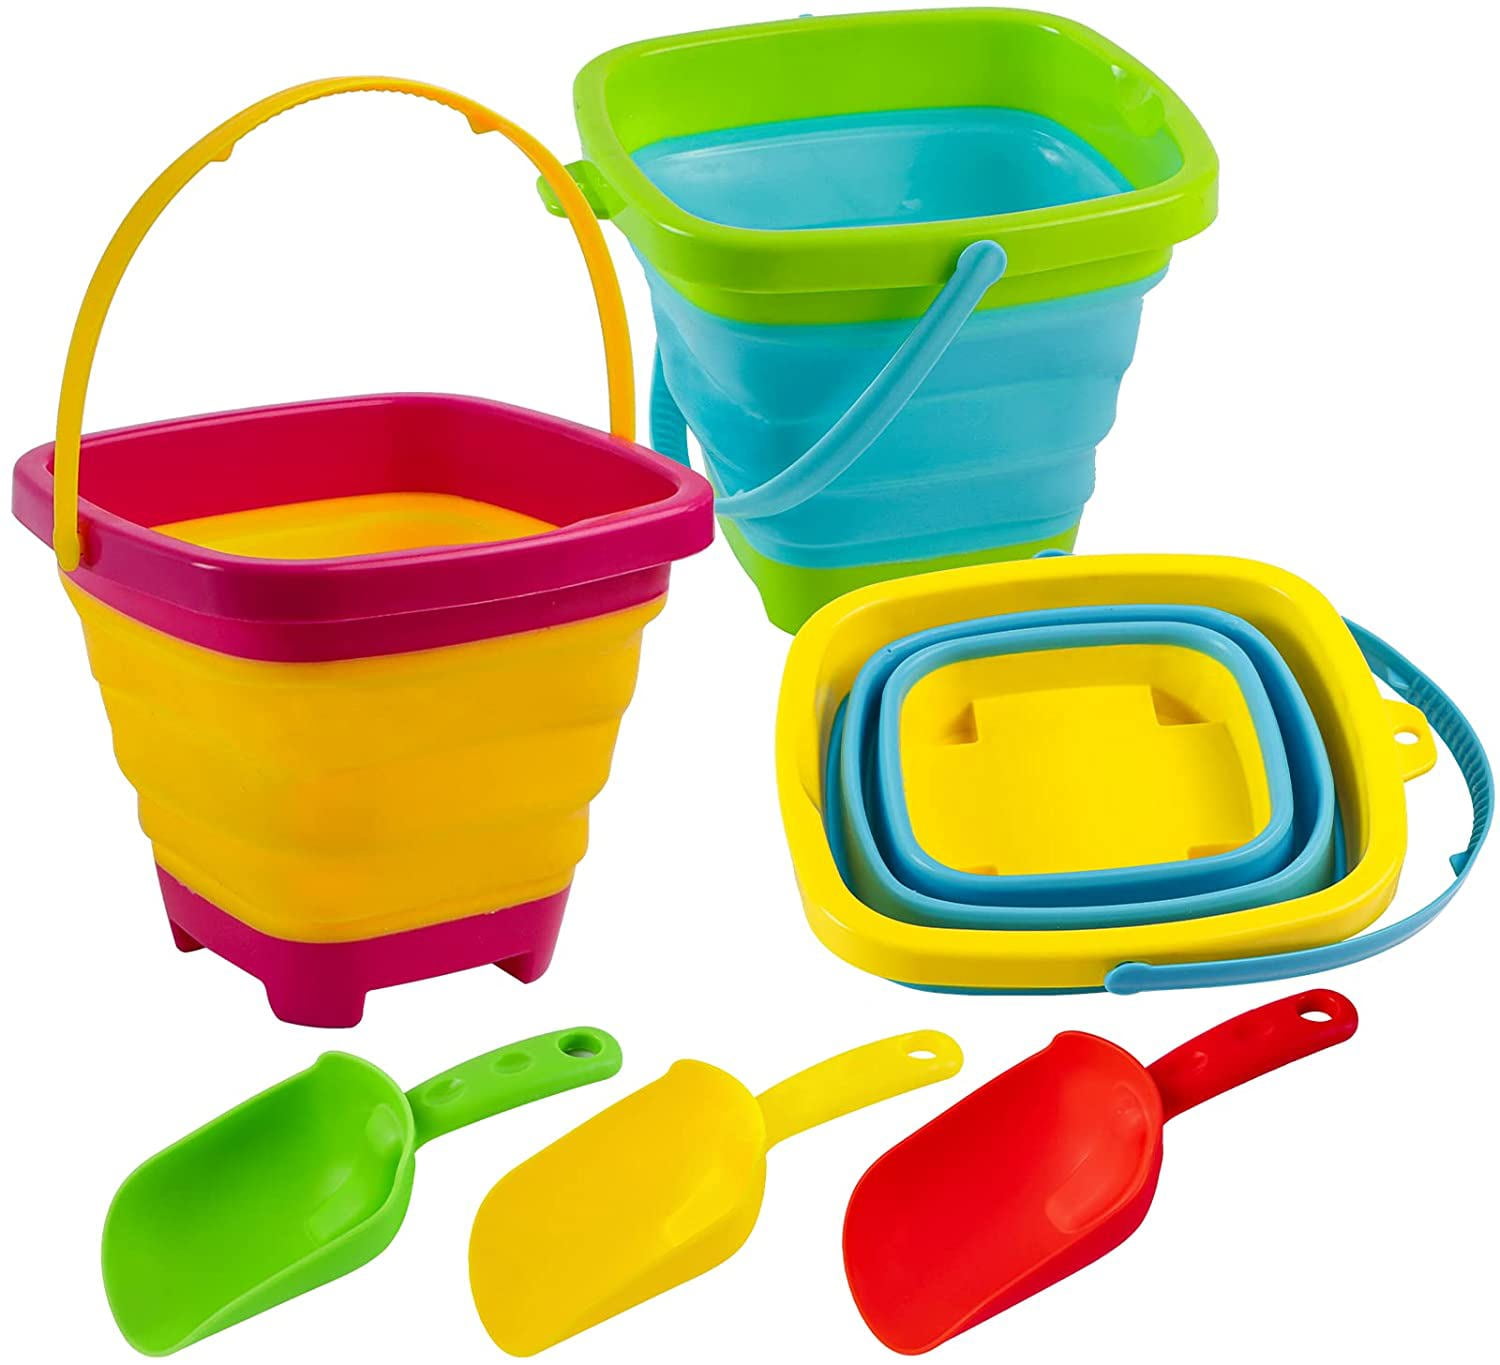 Silicone Beach Foldable Buckets Toys, 3L Jumbo Sand Pails Bucket Set with  Mesh Bag, Swimming Pool Toys for Kids Adults, Gift Set for Gardening